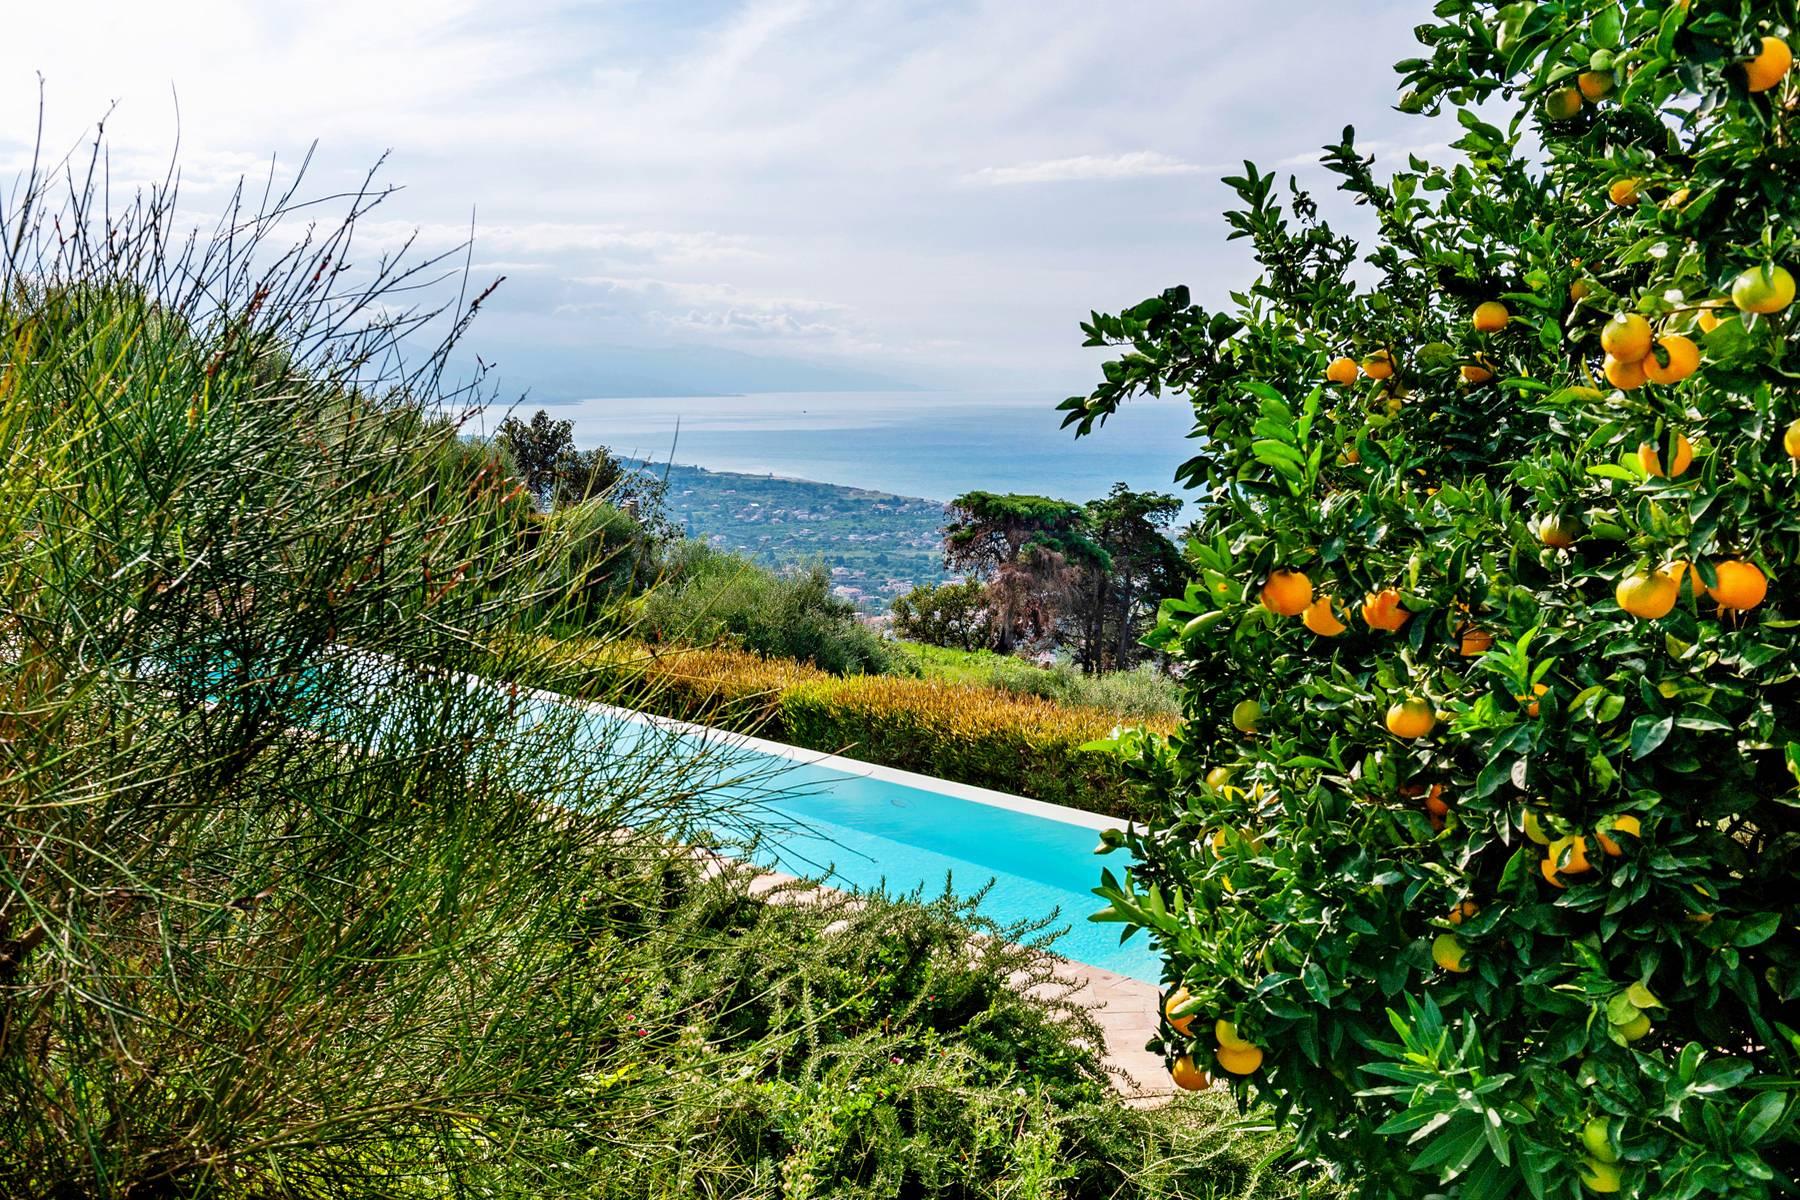 Charming villa with private pool overlooking the Eeolian Islands - 6